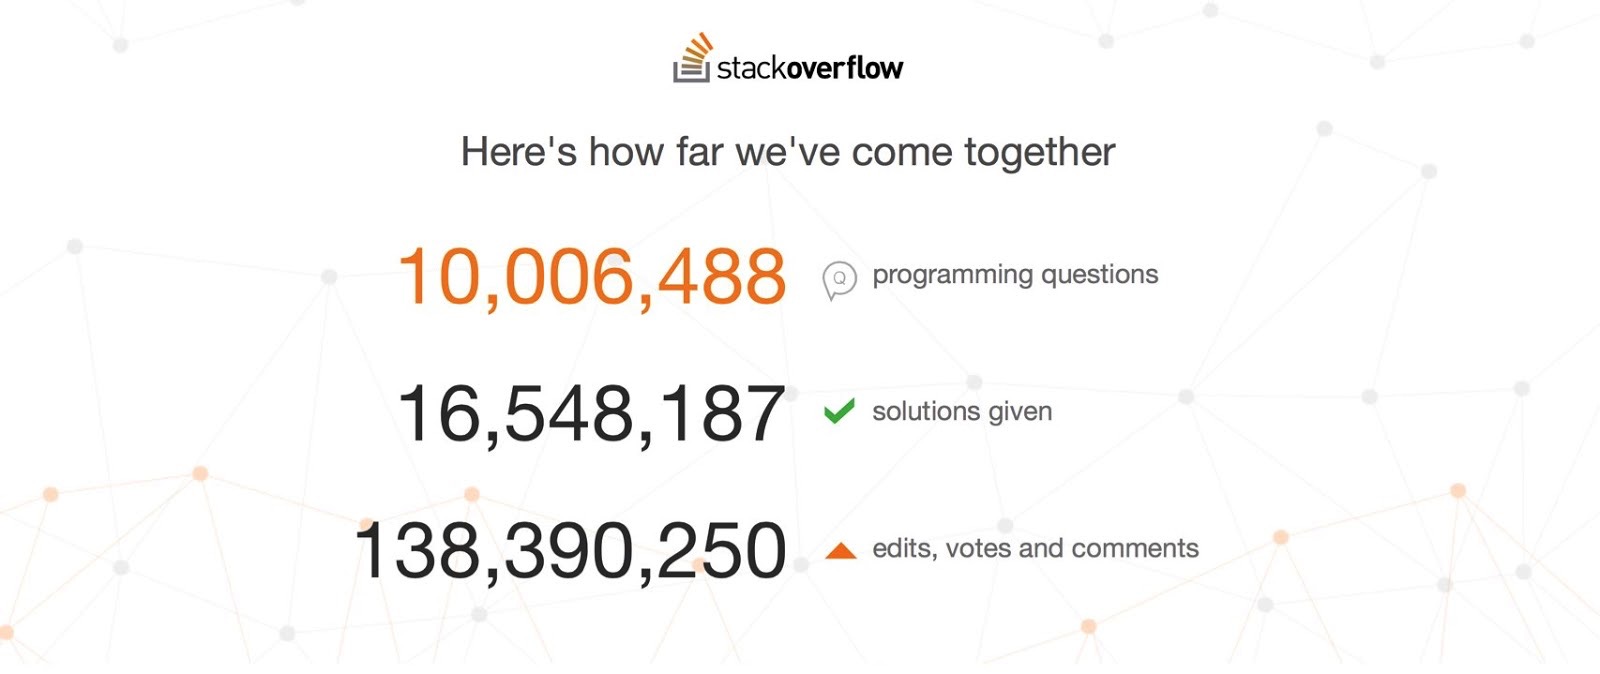 http://neo4j.com/blog/import-10m-stack-overflow-questions/